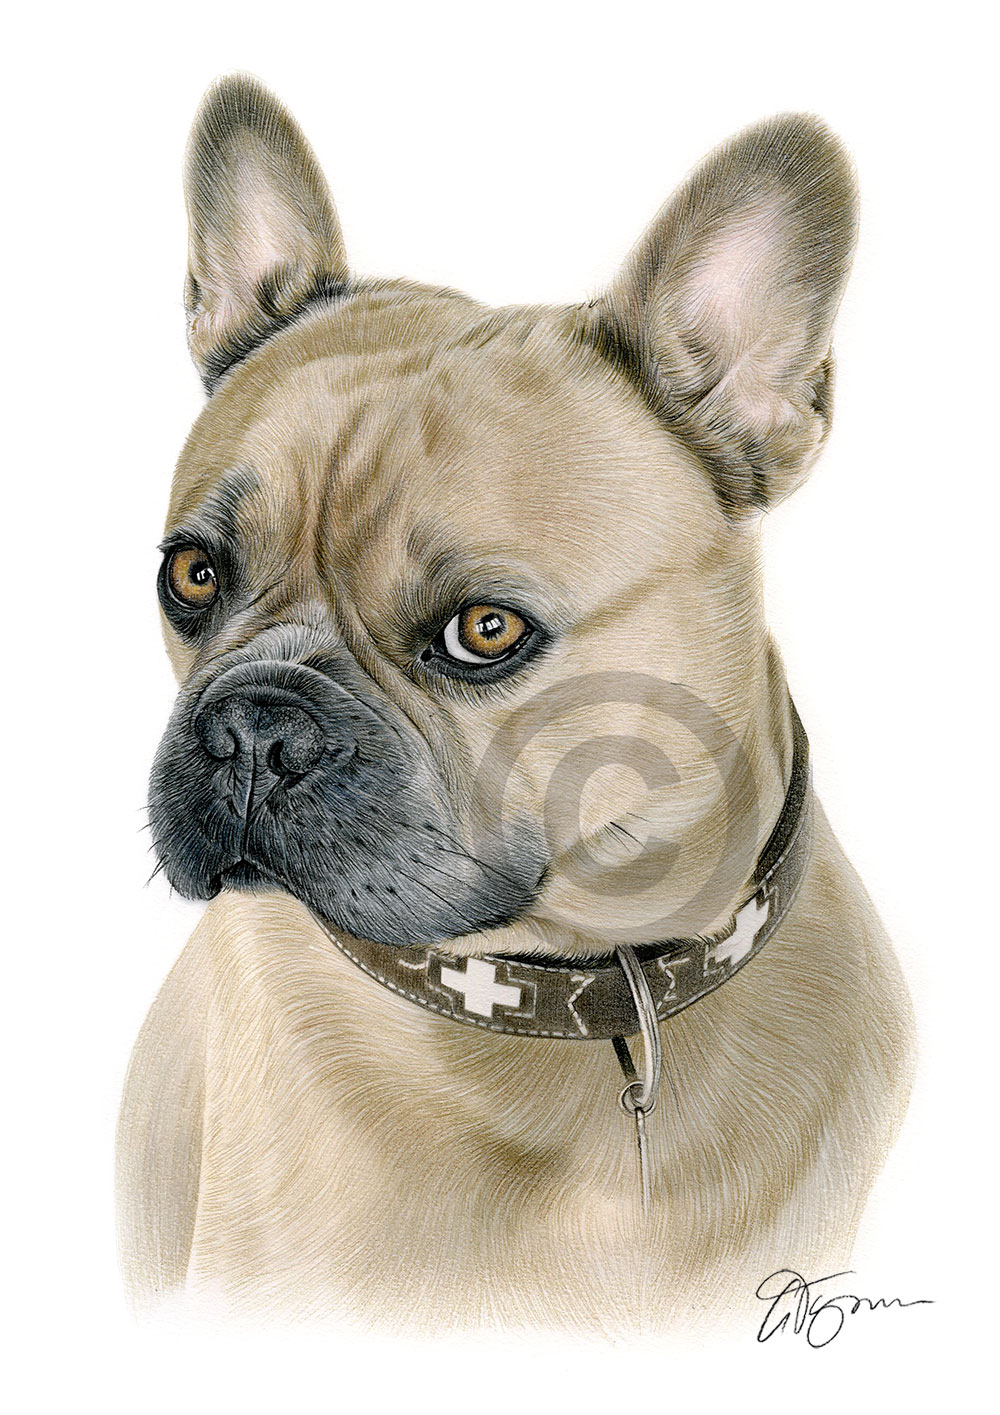 Colour pencil drawing of a french bulldog by artist Gary Tymon